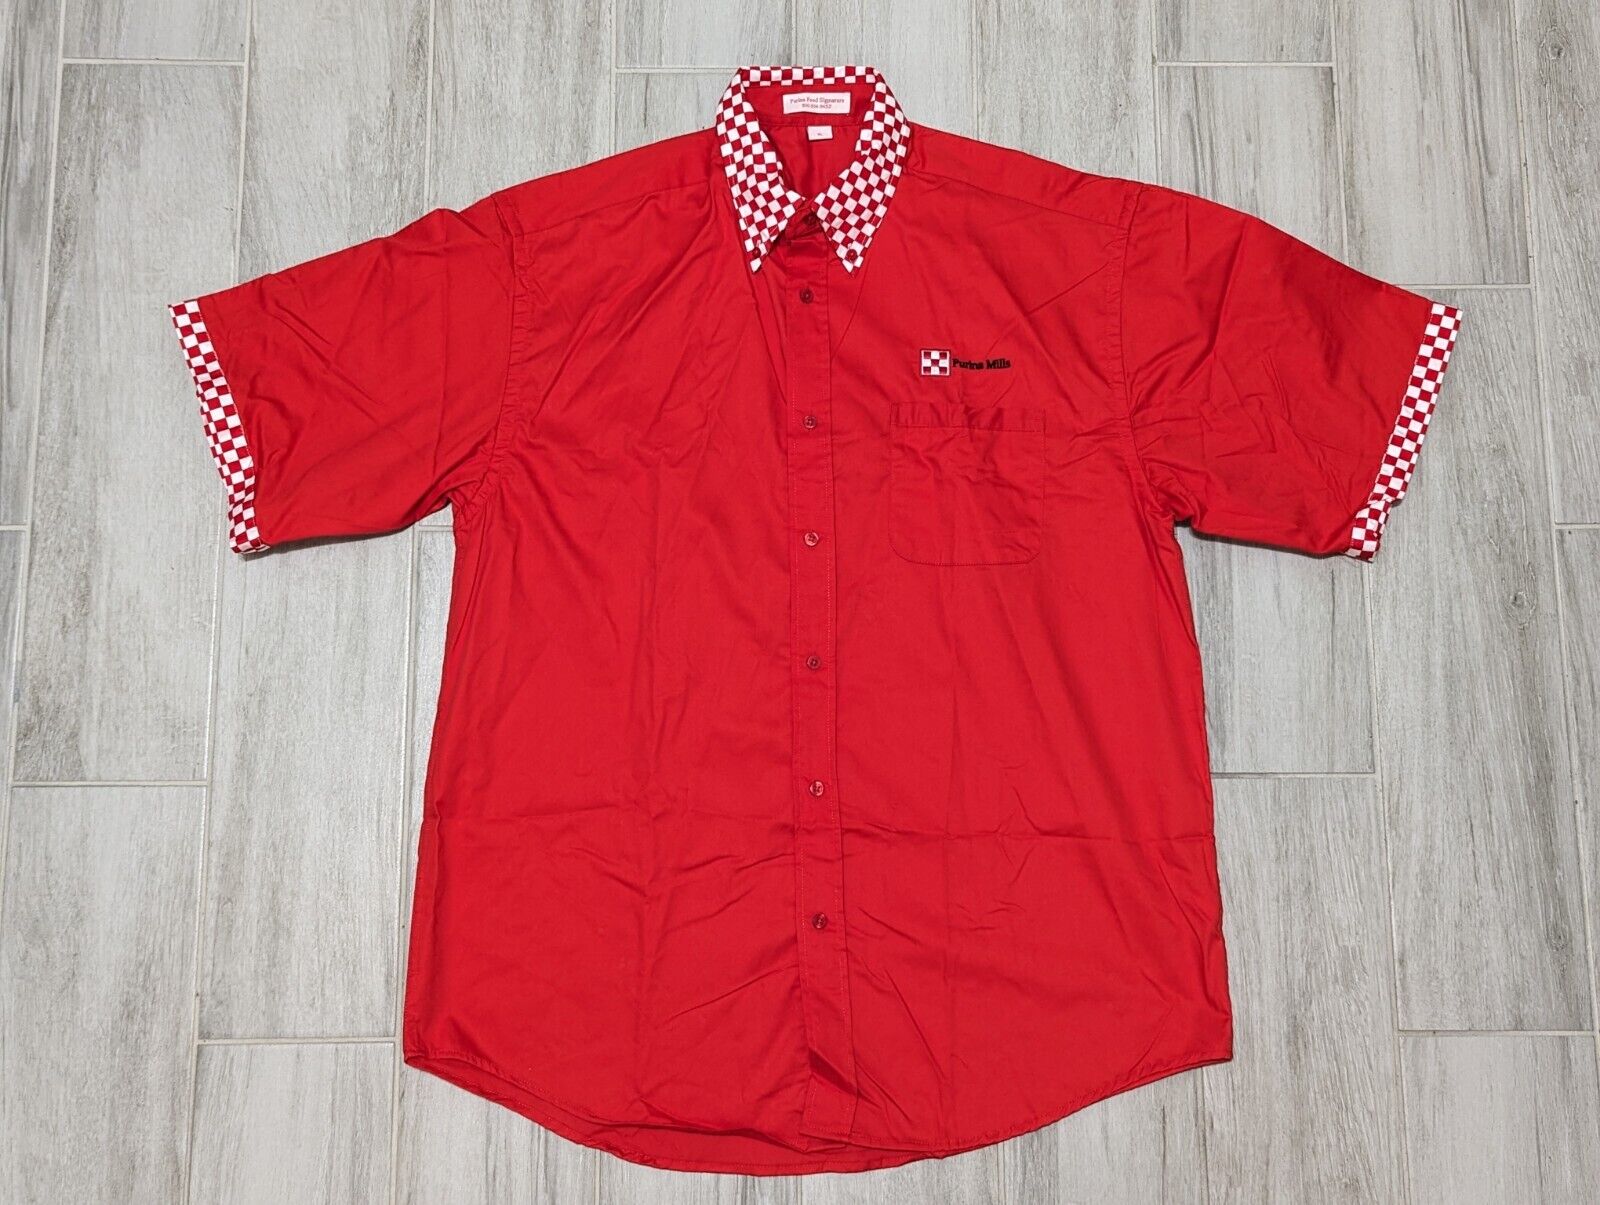 Vintage Purina Mills Checkered Red White Shirt Advertising Company Mens XL NWOT